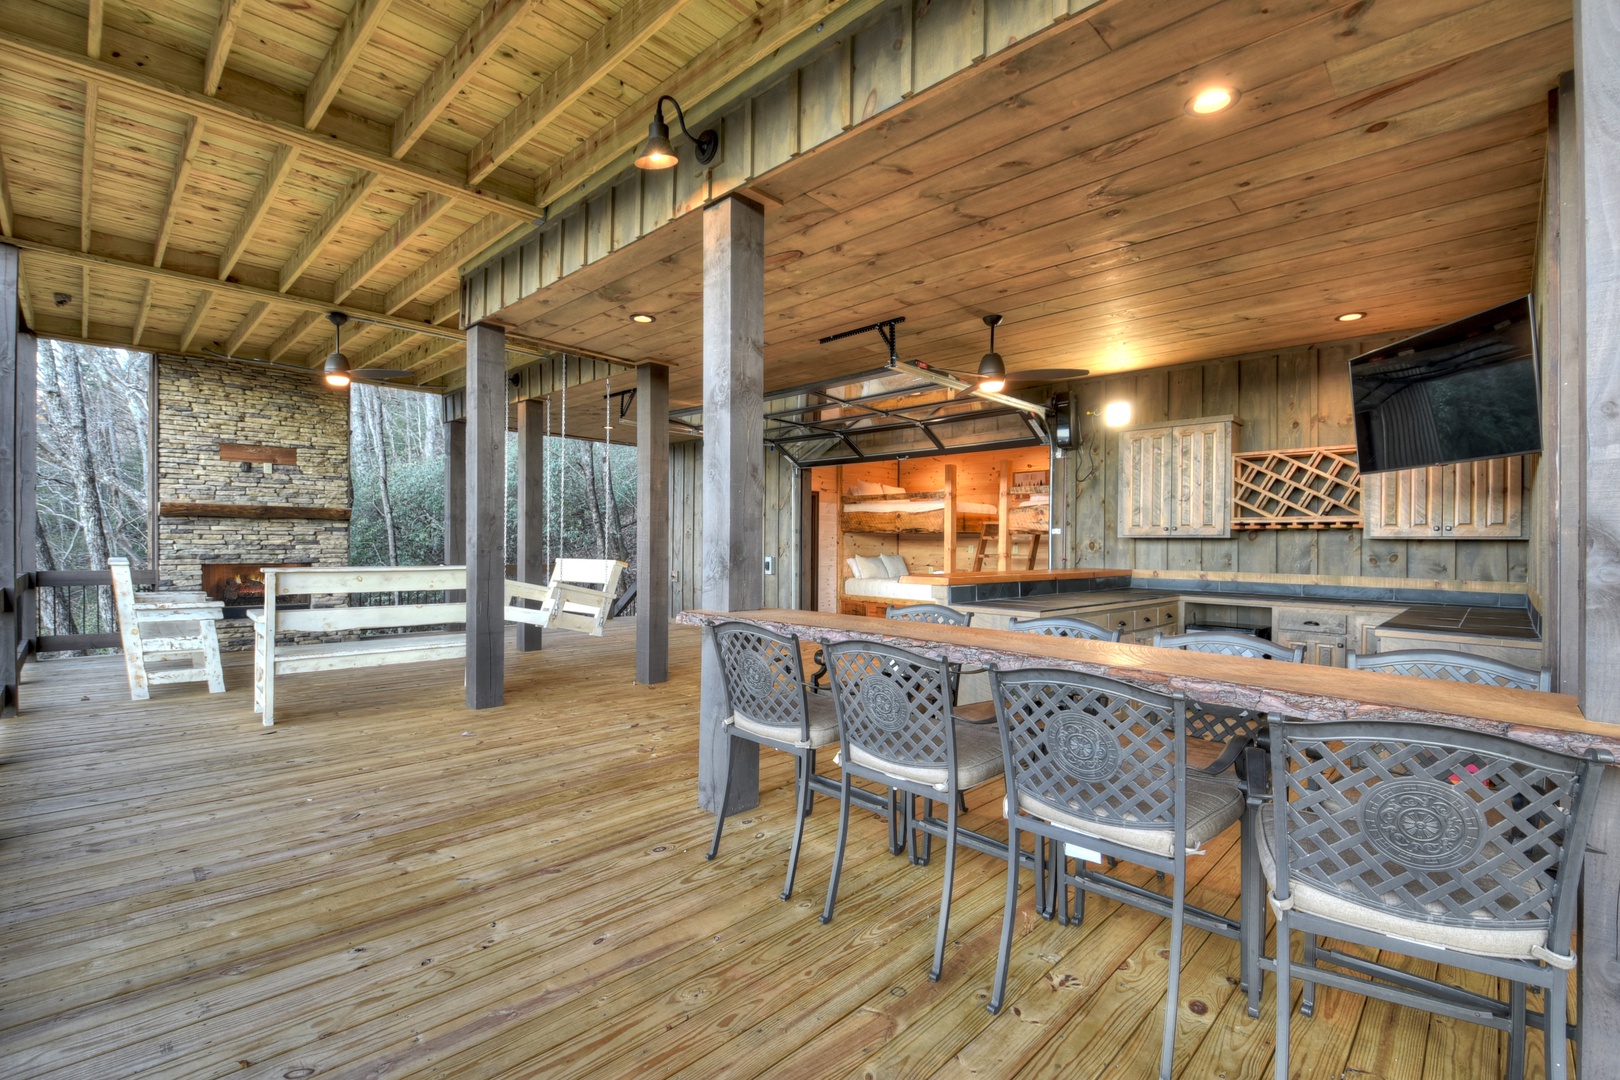 Feather & Fawn Lodge- Lower level deck fireplace and outdoor dining and seating